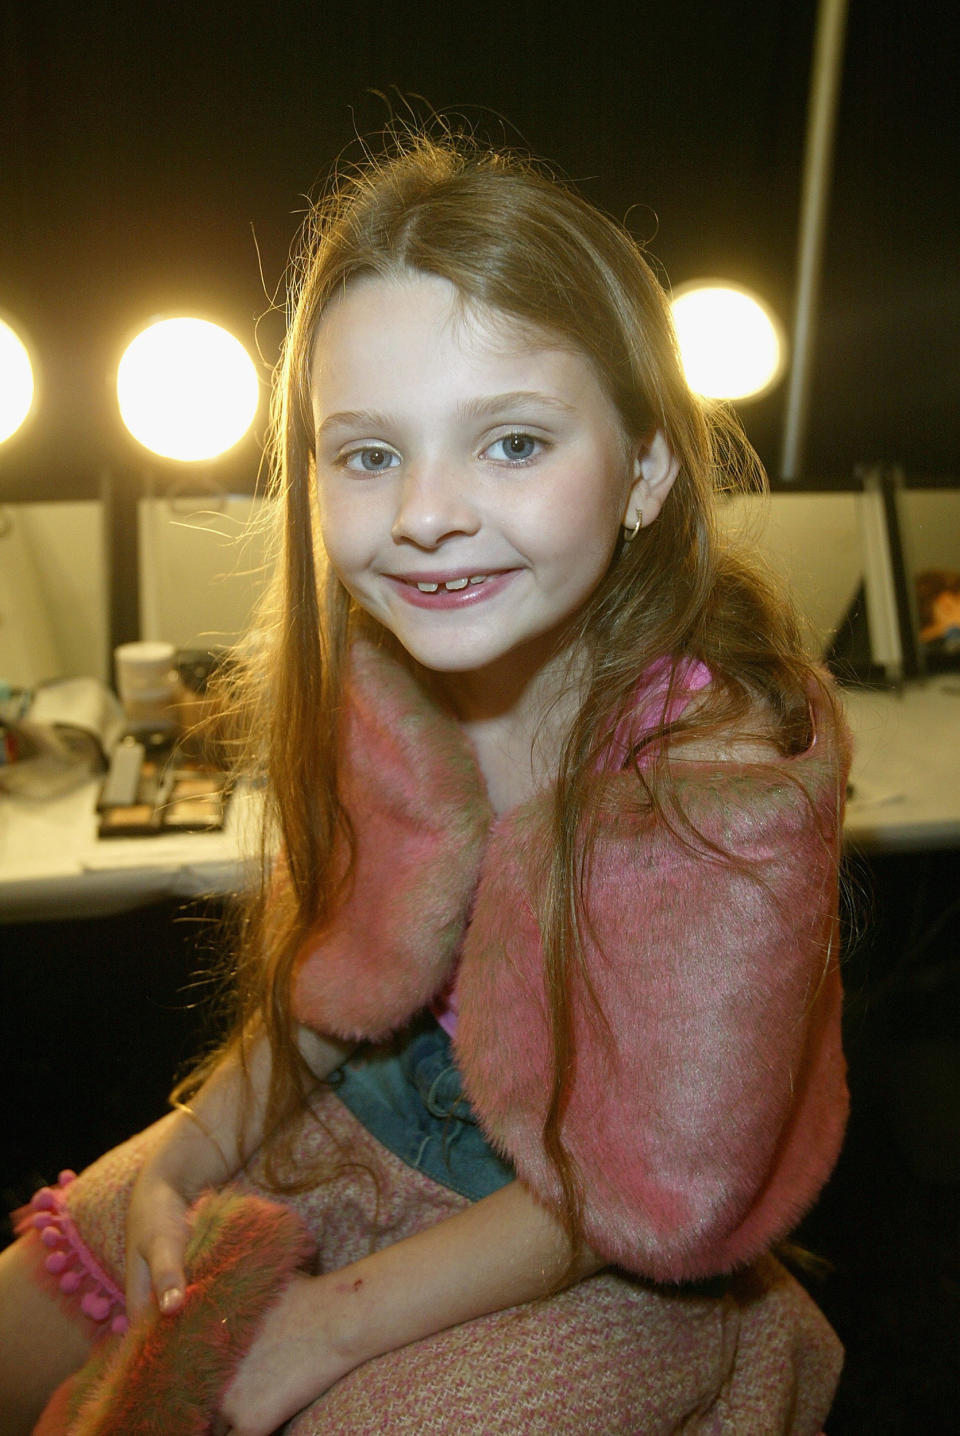 Young actress Abigail Breslin made her film debut in Signs at age 6. She was then cast in a number of famous films as a child actor, including Raising Helen and Little Miss Sunshine. 